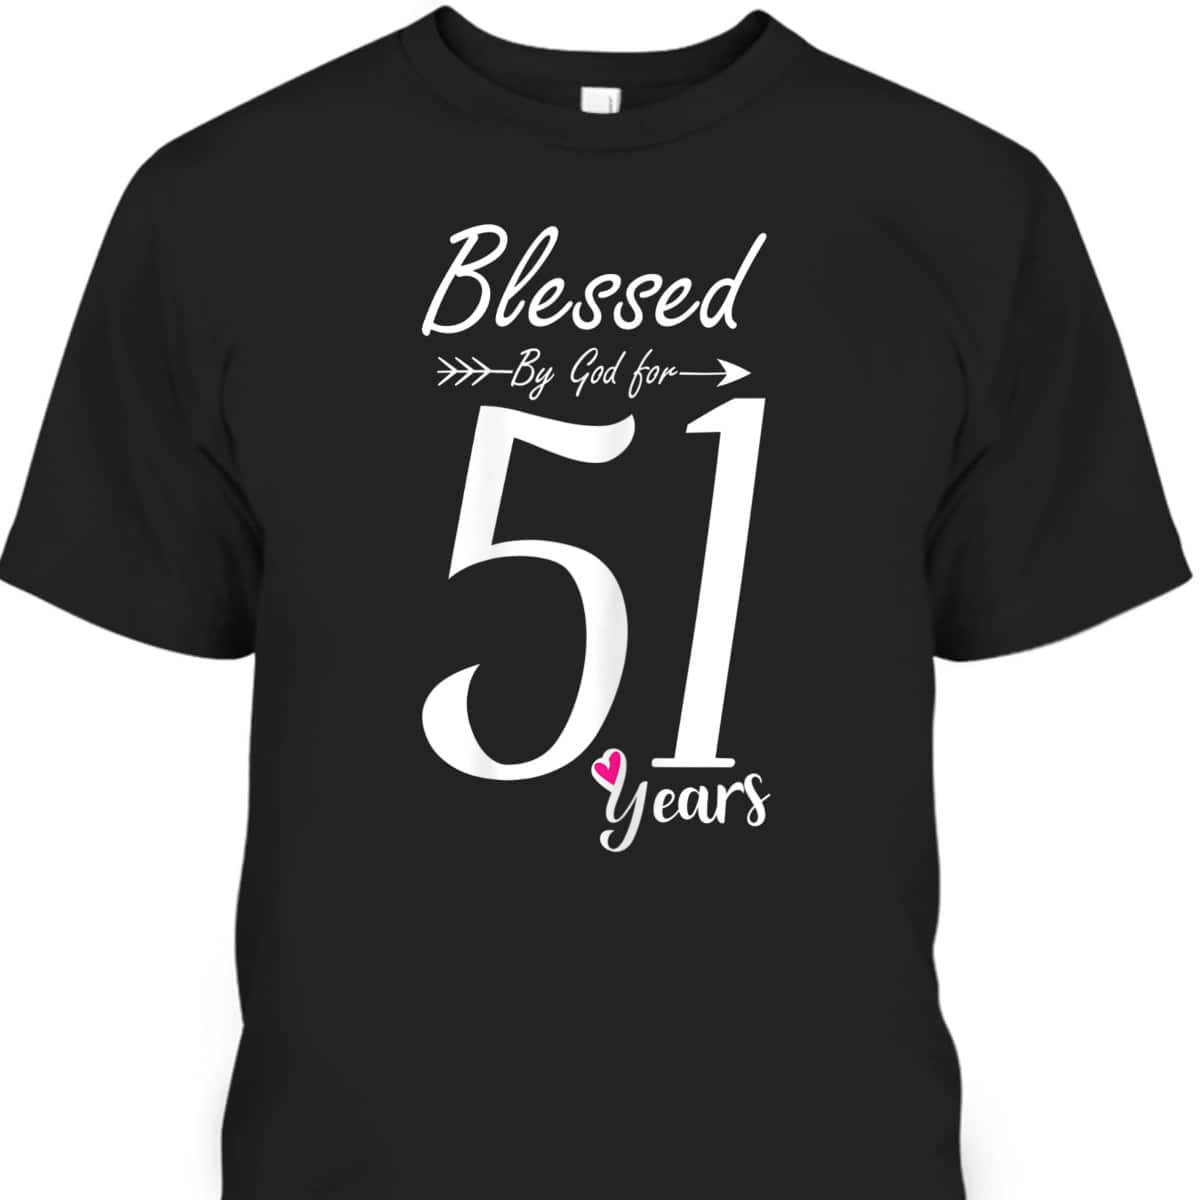 Christian 51st Birthday T-Shirt And Blessed For 51 Years